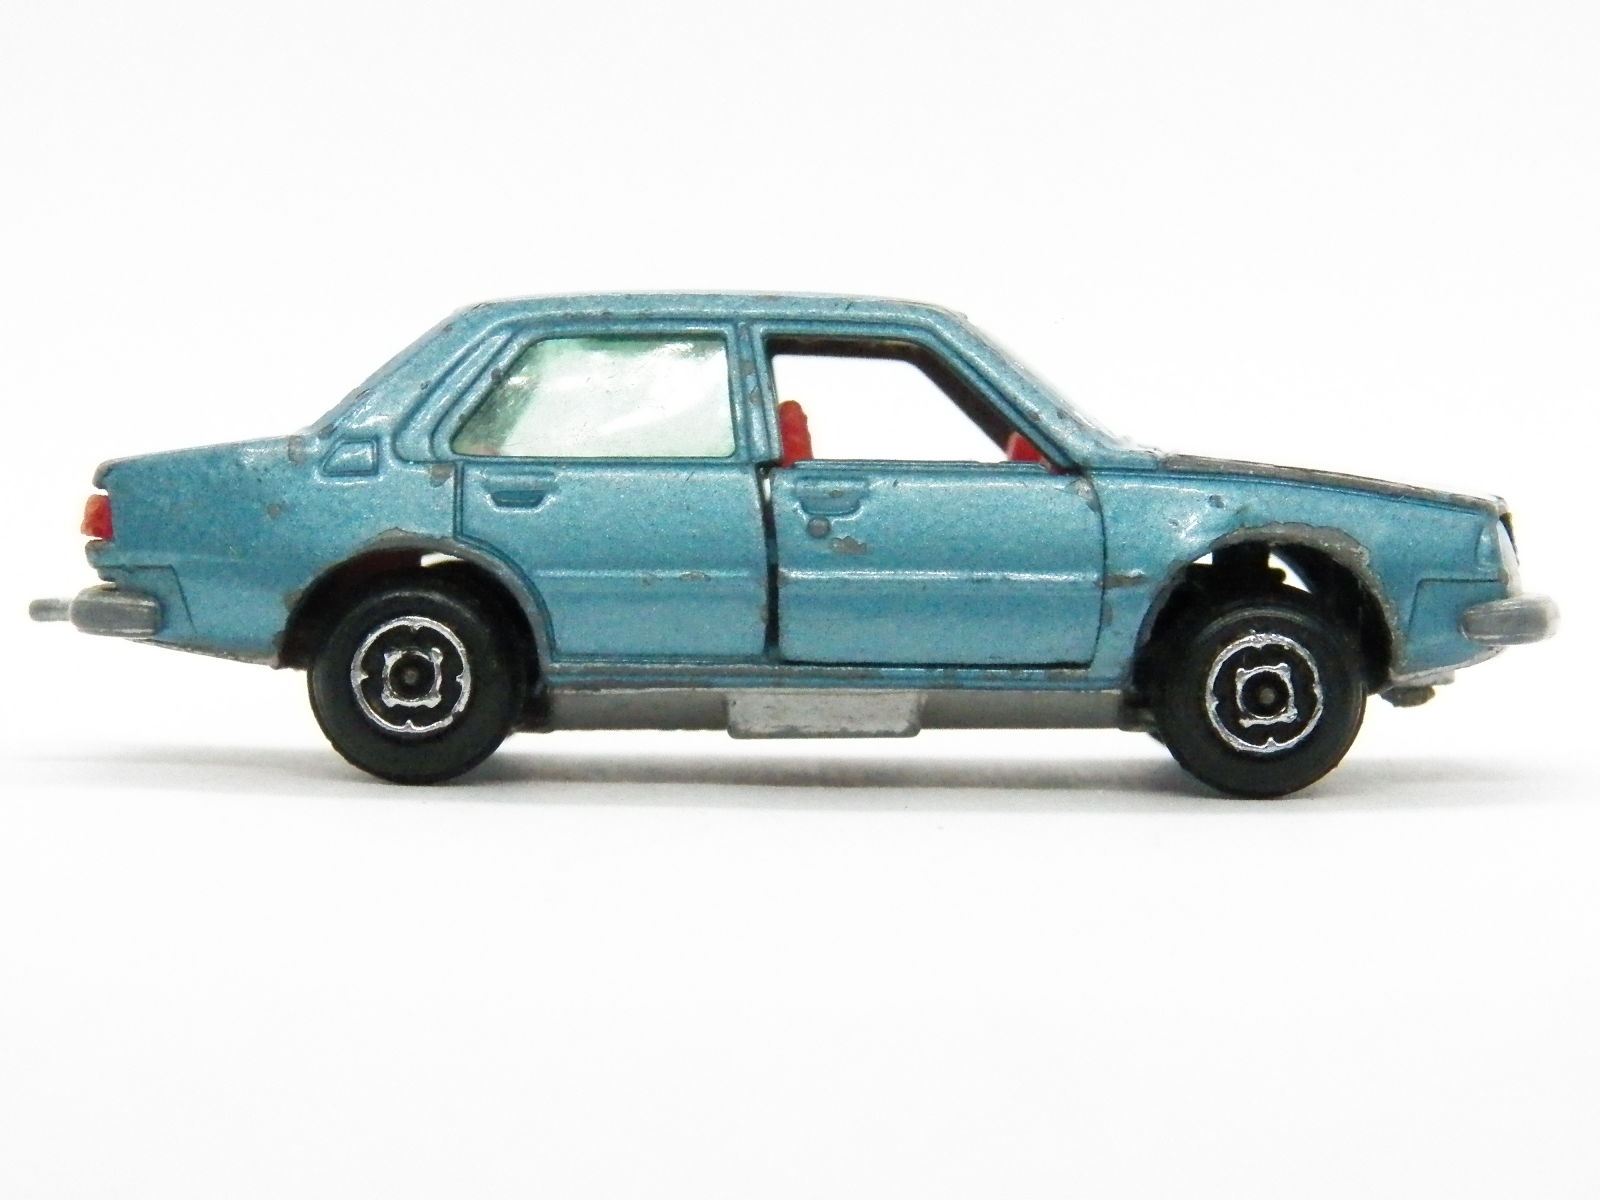 Illustration for article titled Guisval 1:64 Renault 18 GTS